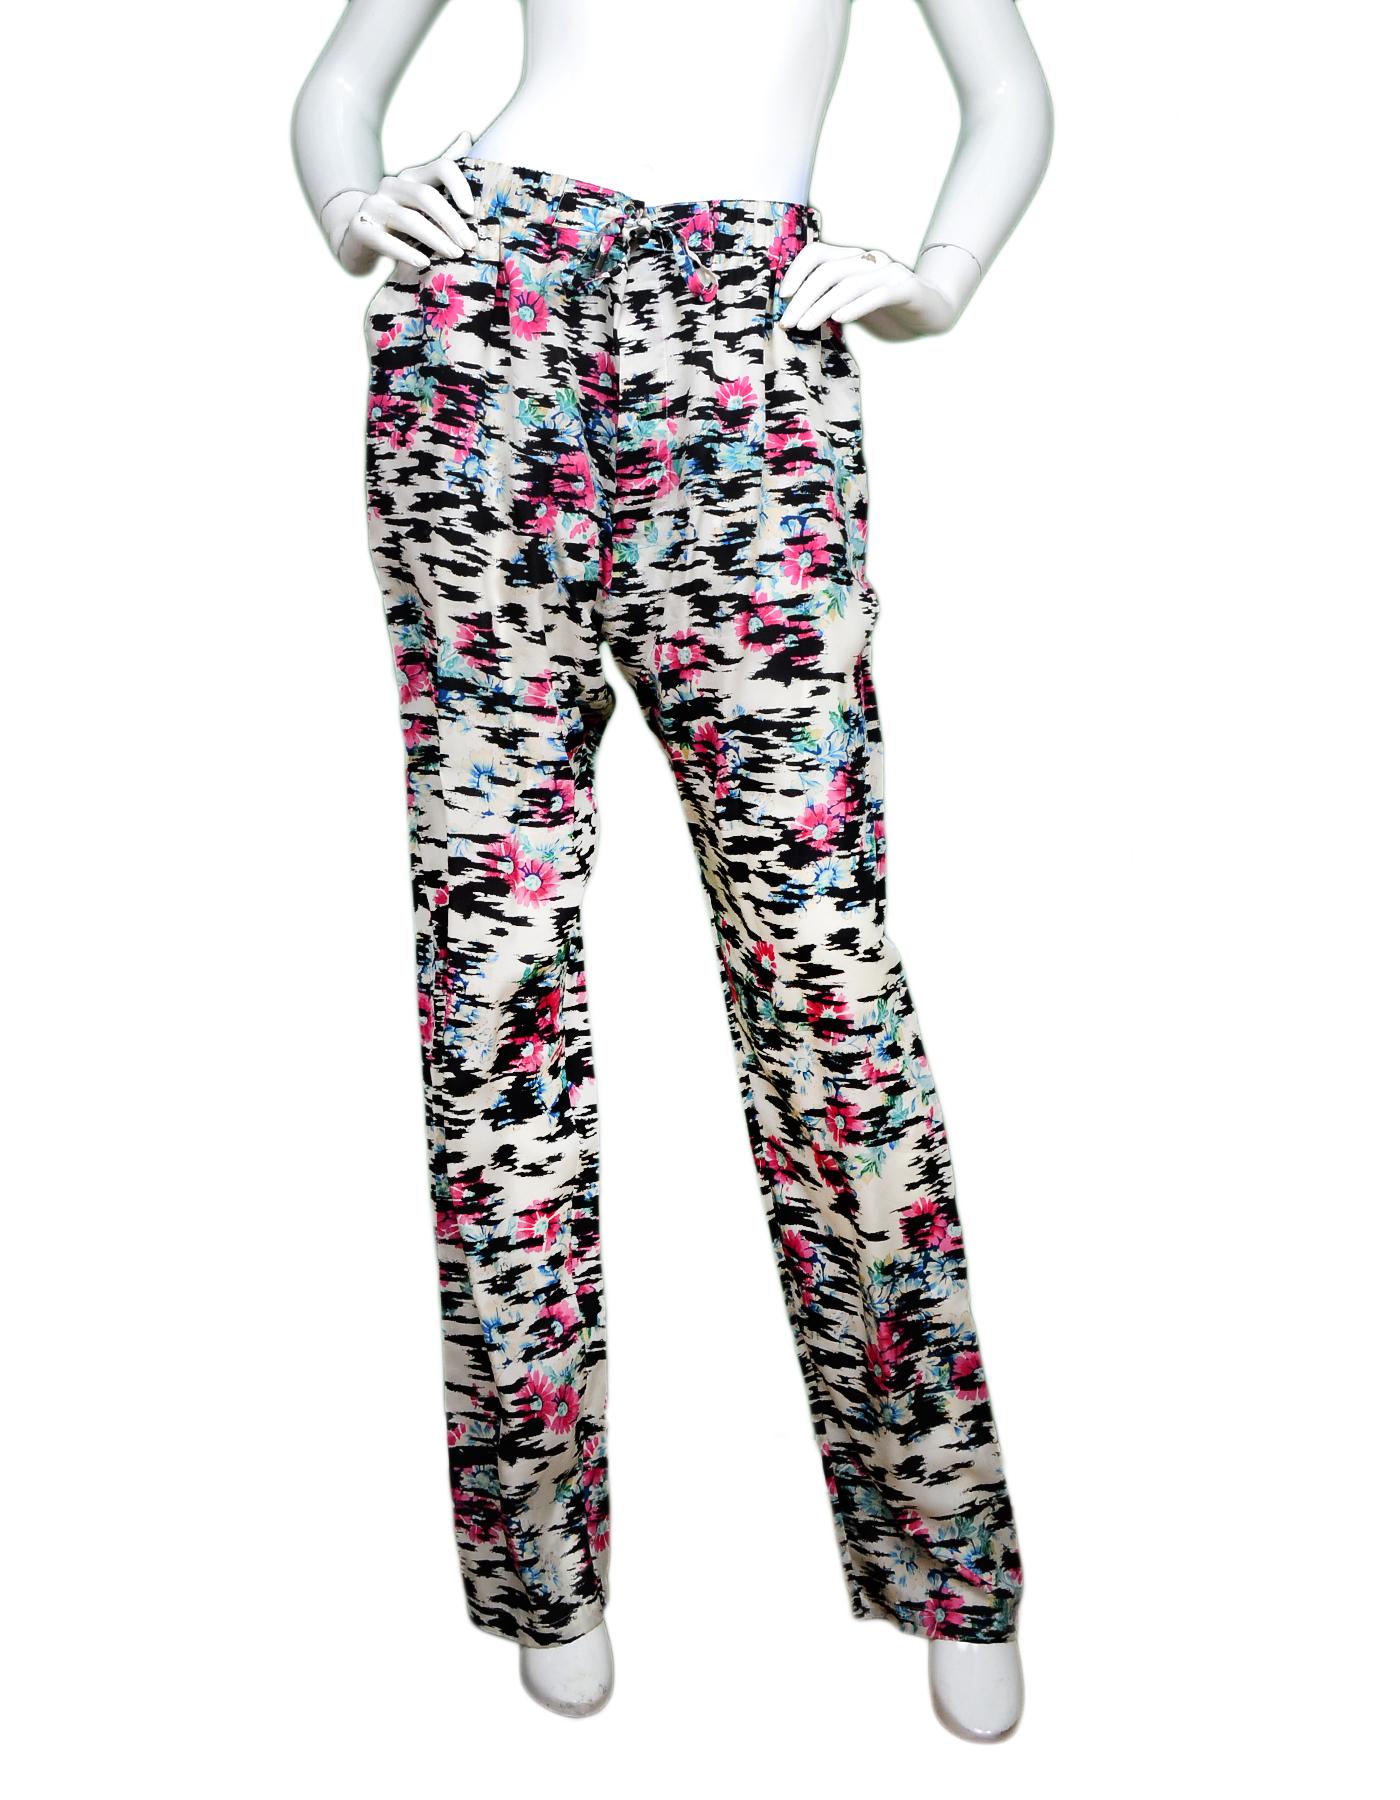 Balenciaga Black/White Silk Pants W/ Pink Flowers Sz 34

Made In:  China
Color: Black, white, pink, blue/green
Materials: 100% silk
Closure/Opening: Button fly with tie top
Overall Condition: Excellent pre-owned condition 

Measurements: 
Waist: 31